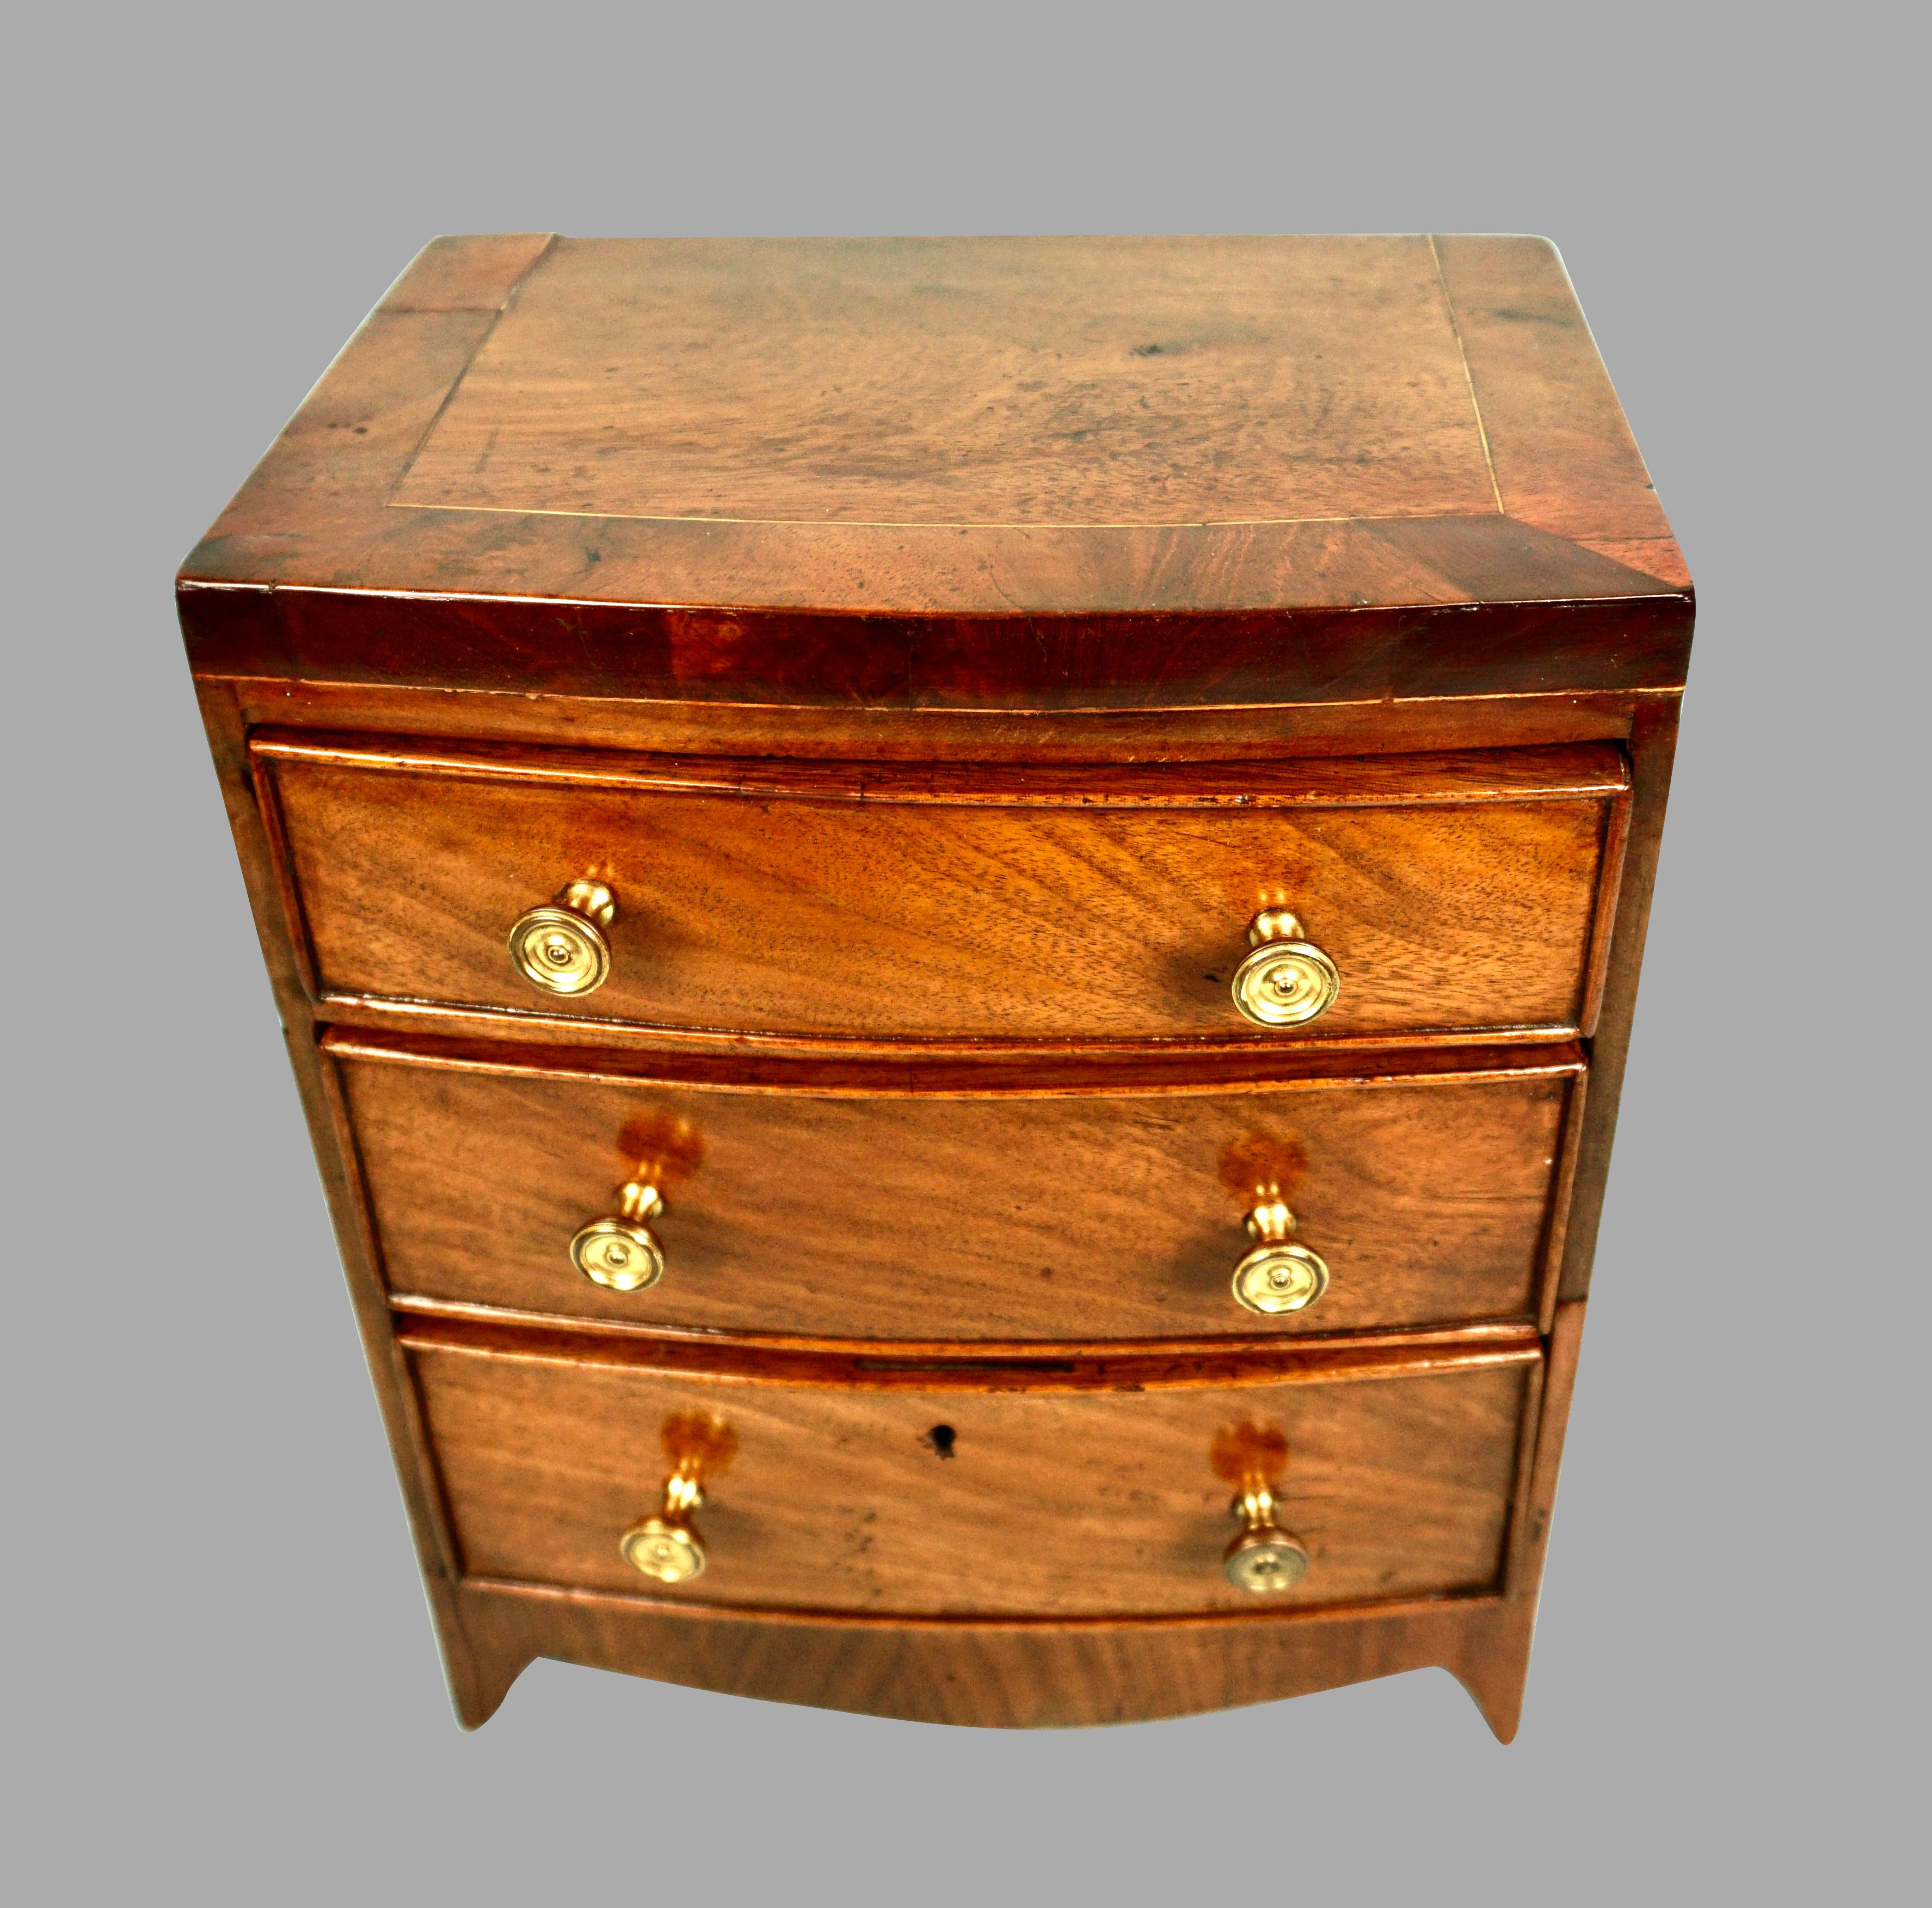 A charming miniature Hepplewhite style 3 drawer chest, the crossbanded top over 3 graduated small drawers resting on French feet. This miniature is very true to form of full-sized chests of this style. Now with replaced brass knobs, this piece would